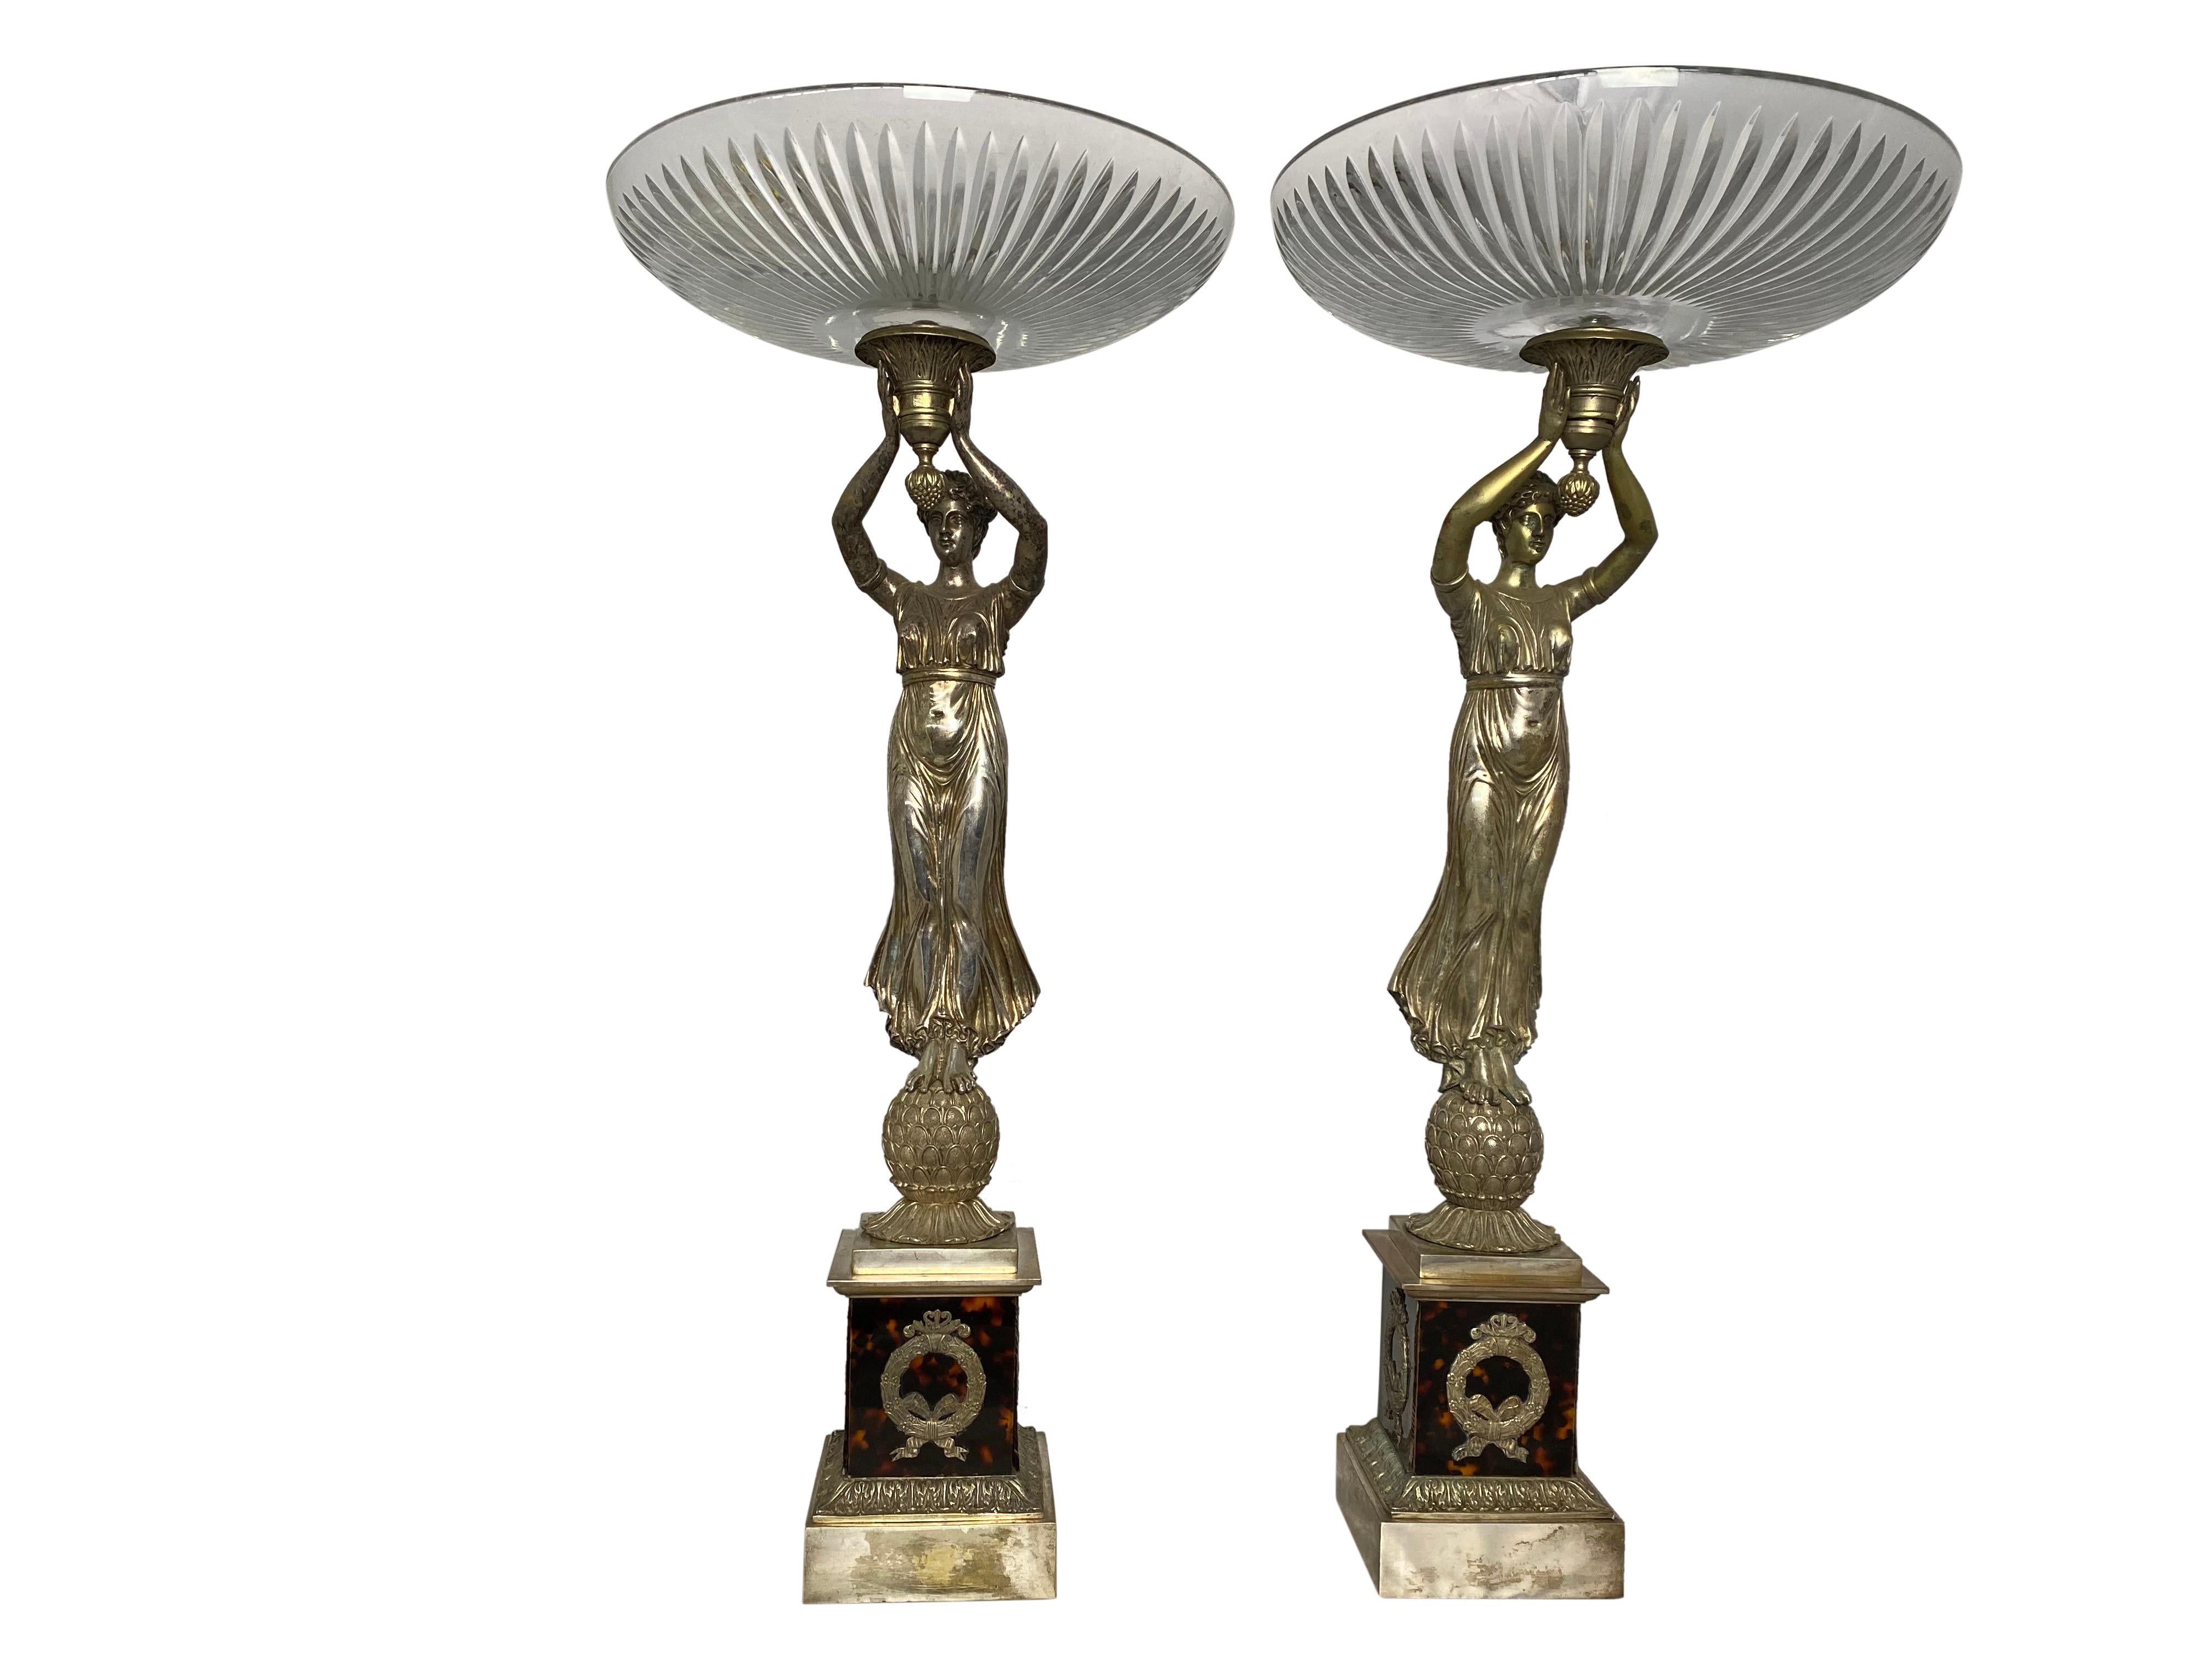 This fine pair of French, silver, allegorical tazzas are tortoiseshelled. They include detailed wreaths on the walls of the base. A finely dressed woman holds each dish proudly above her head. Very unique in style, this pair make exceptional